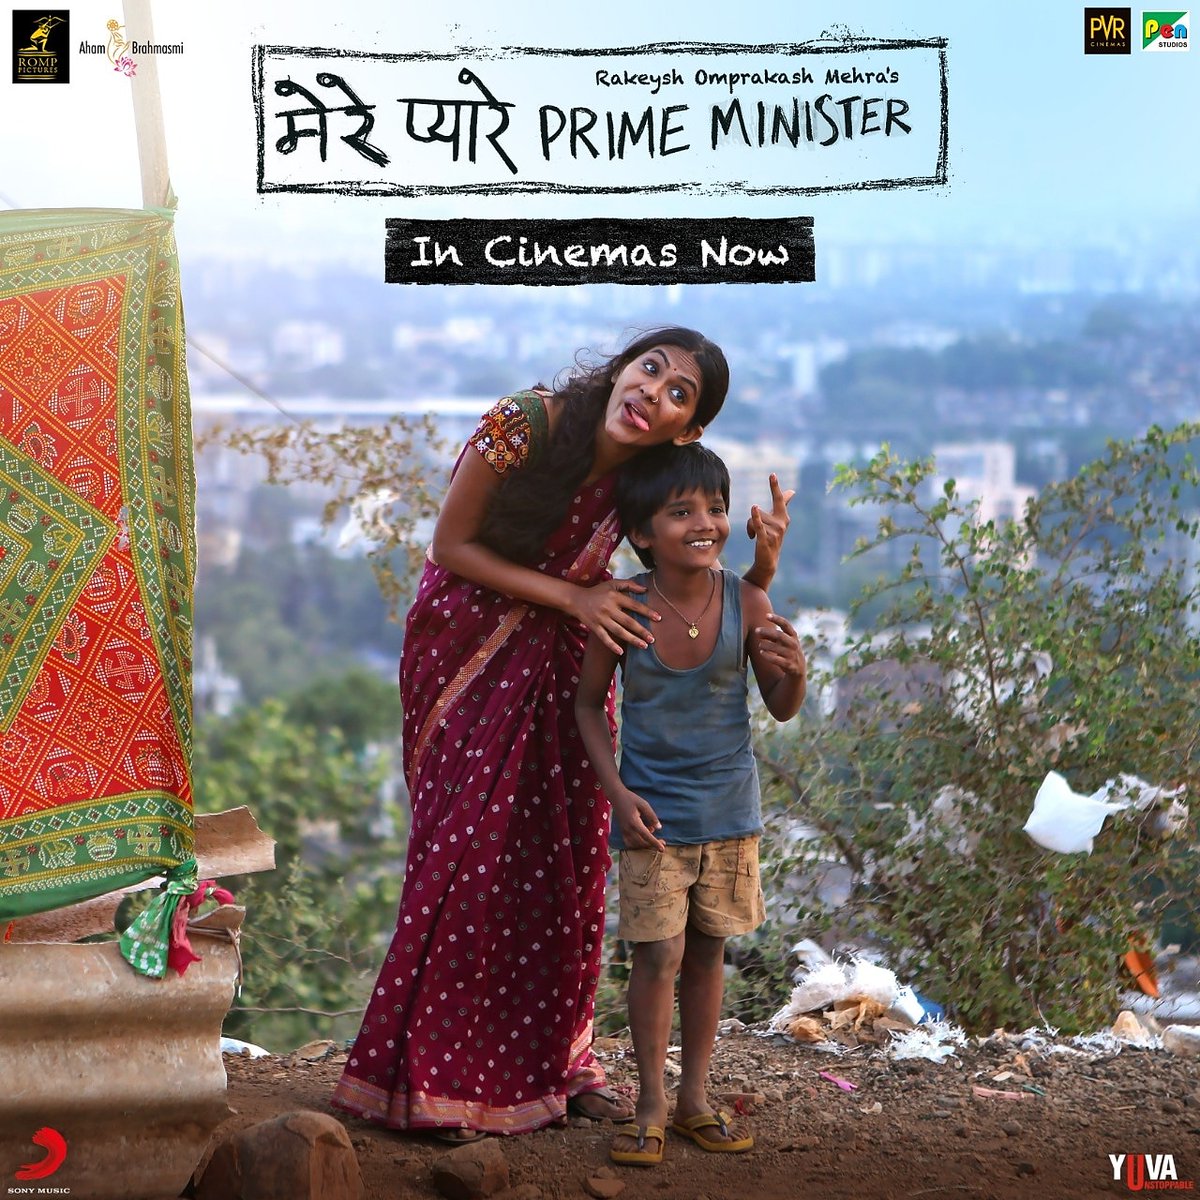 mere pyare prime minister box office collection